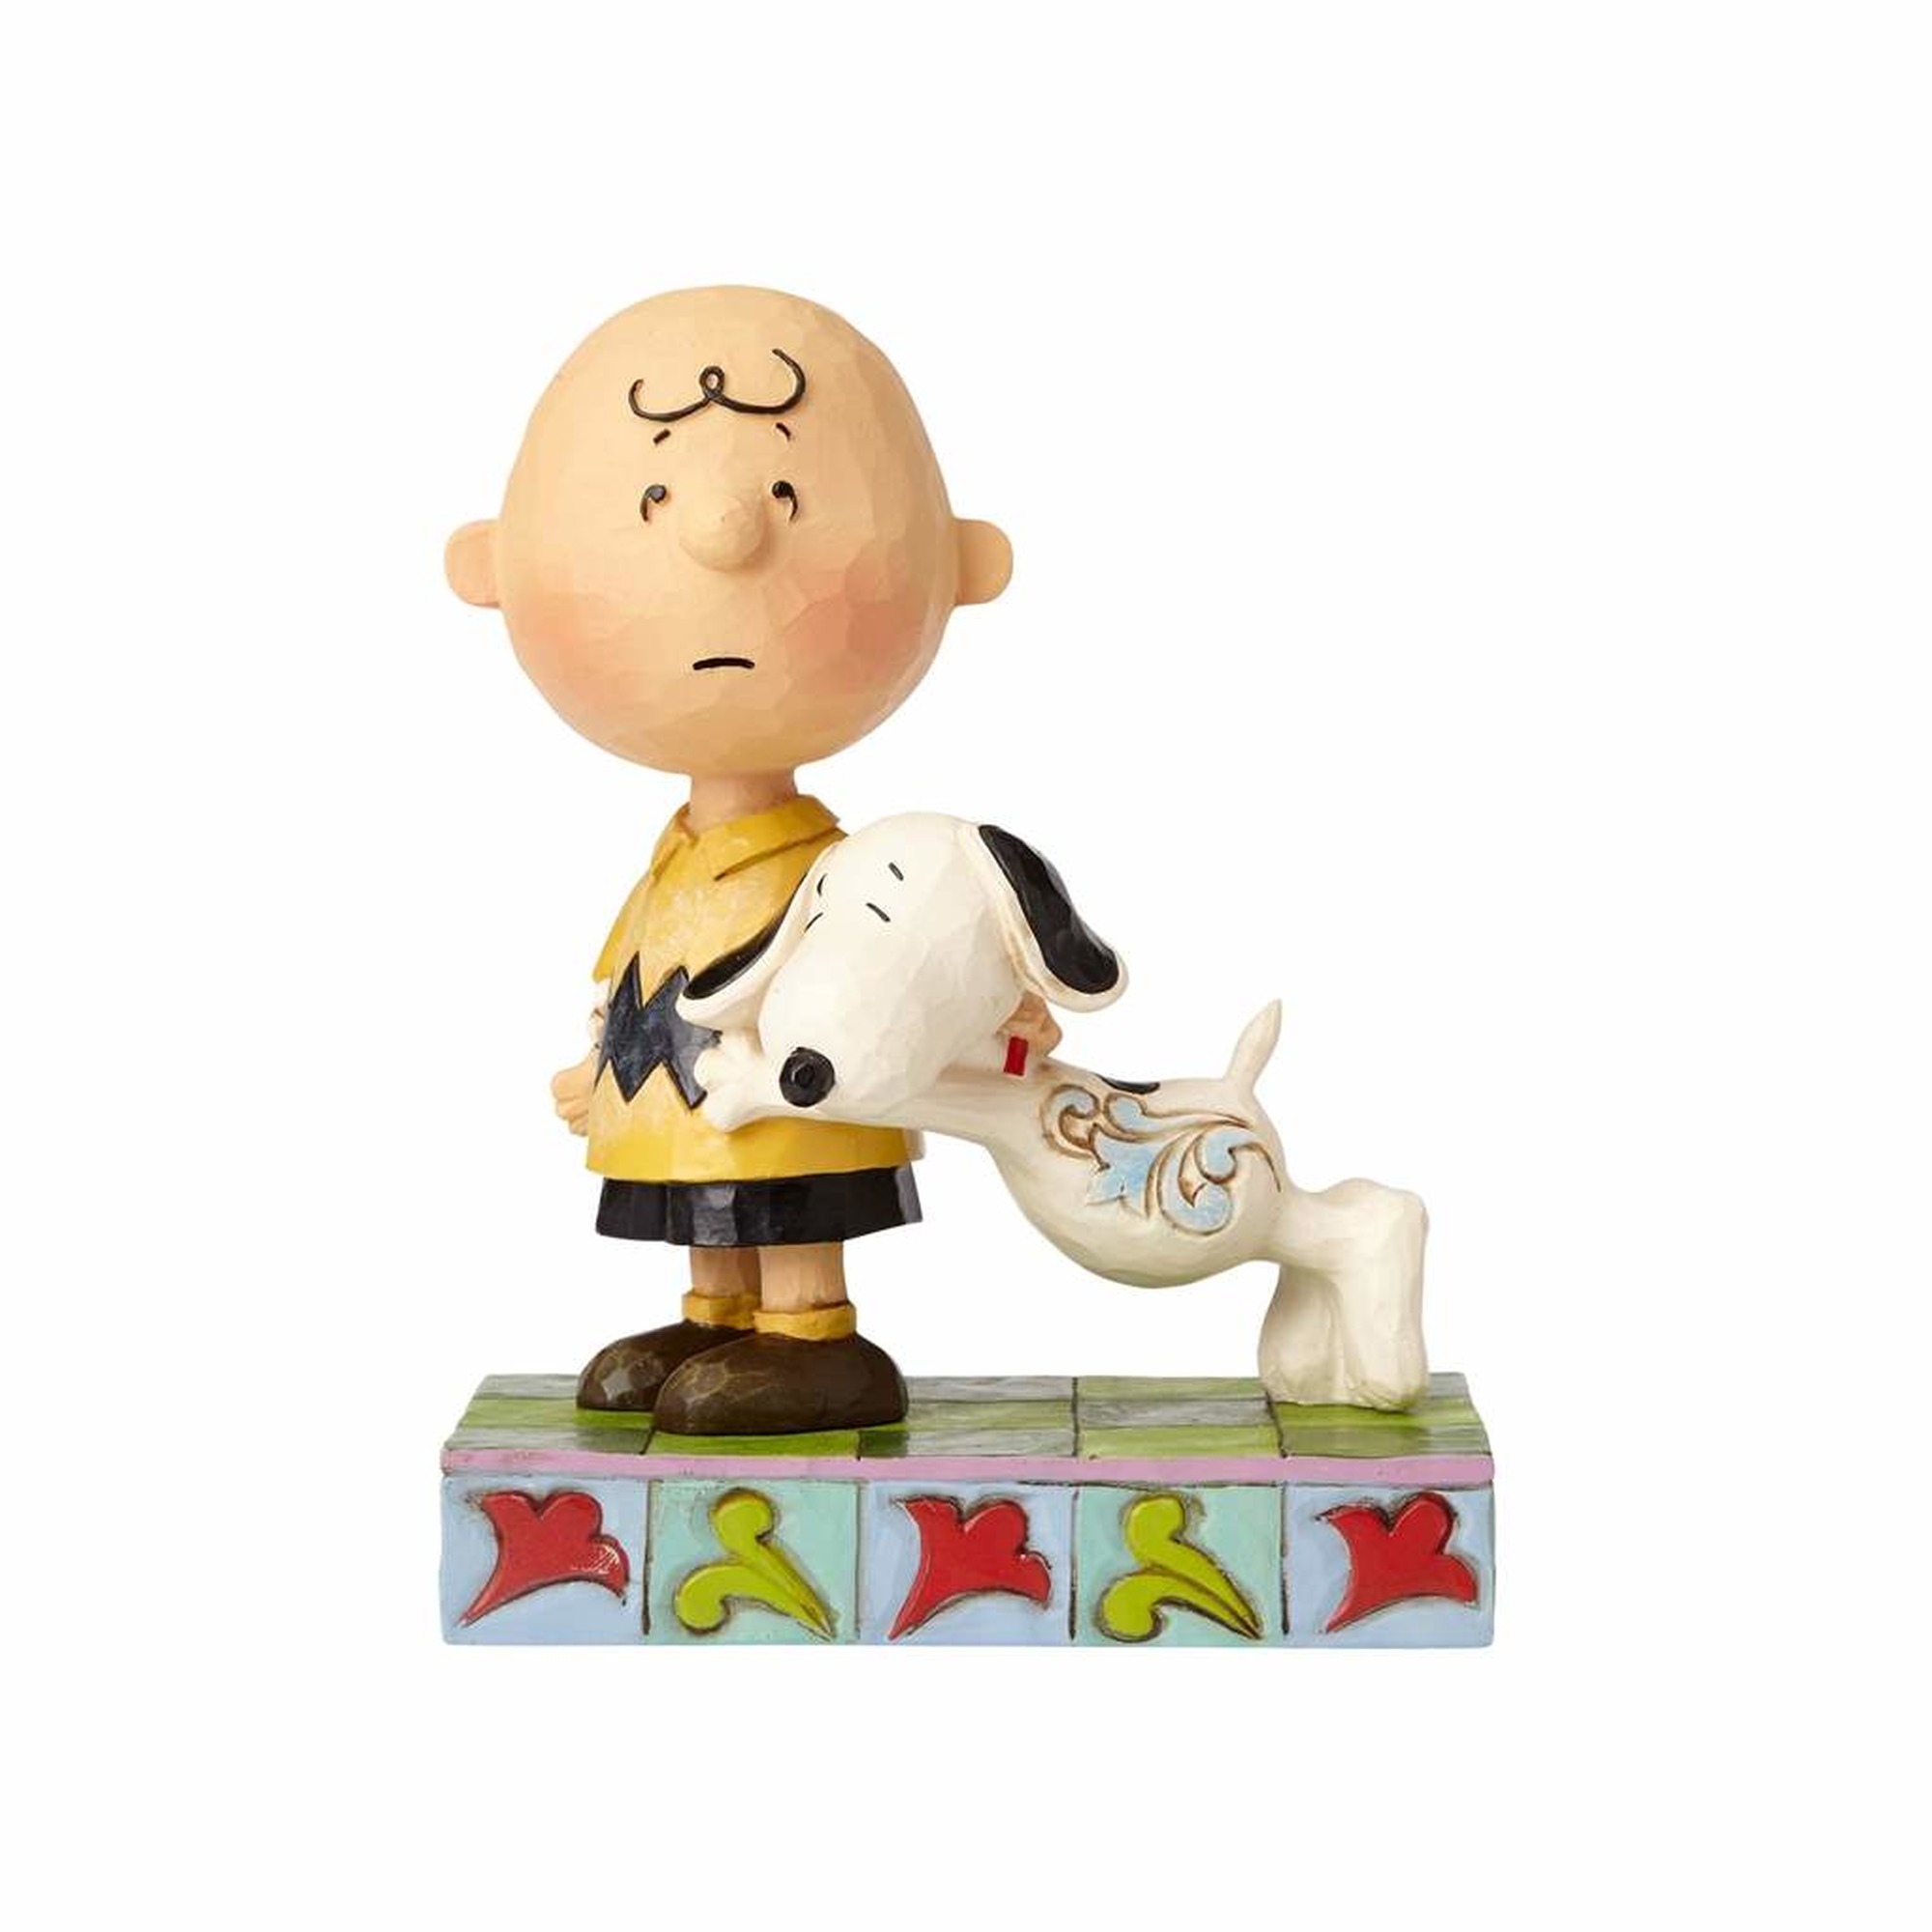 Snoopy with Charlie Brown "Don't Leave"